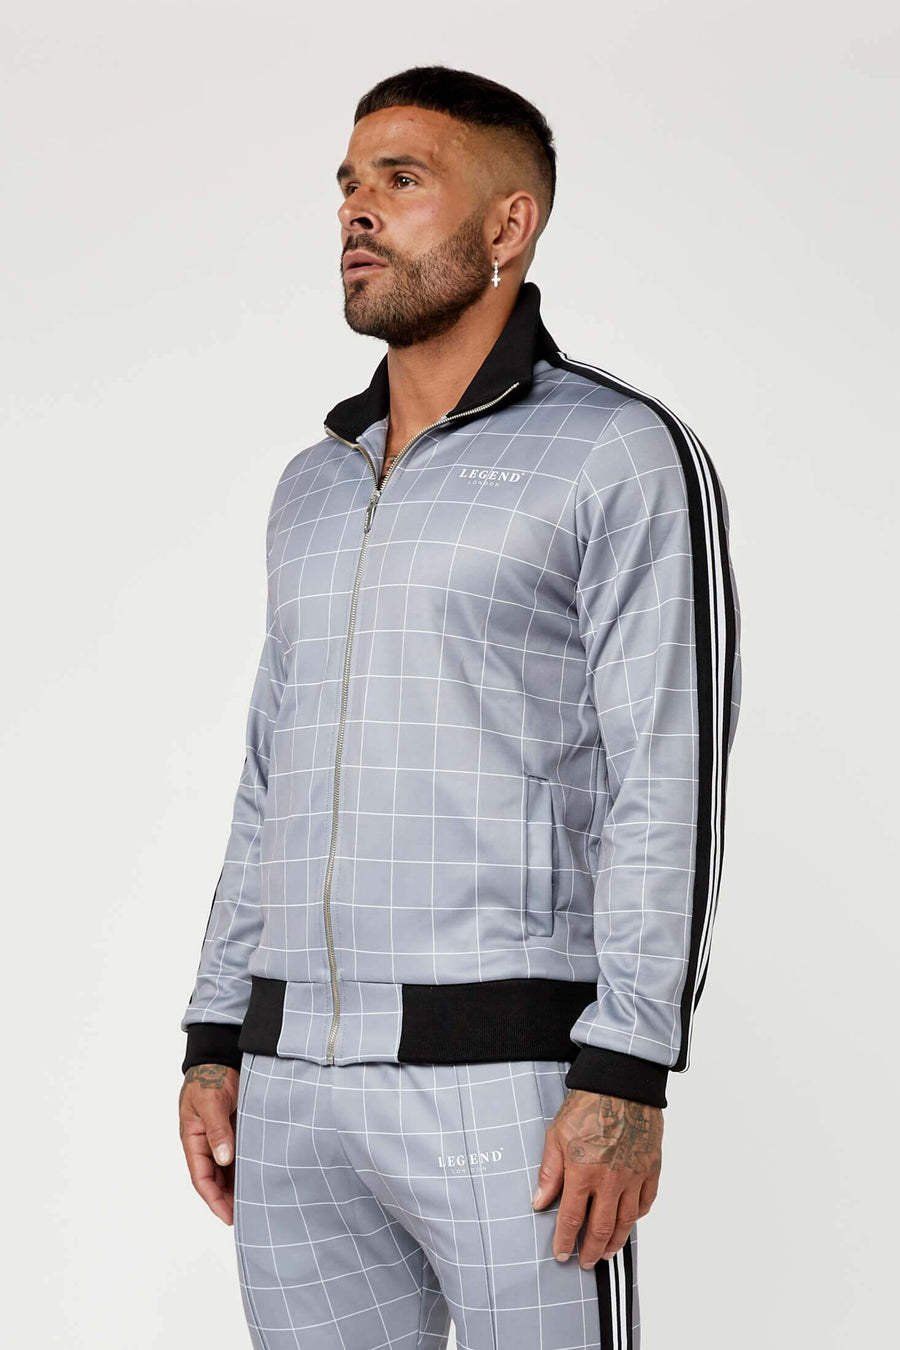 Legend London Tracksuits Track Jacket In Windowpane Check - Grey